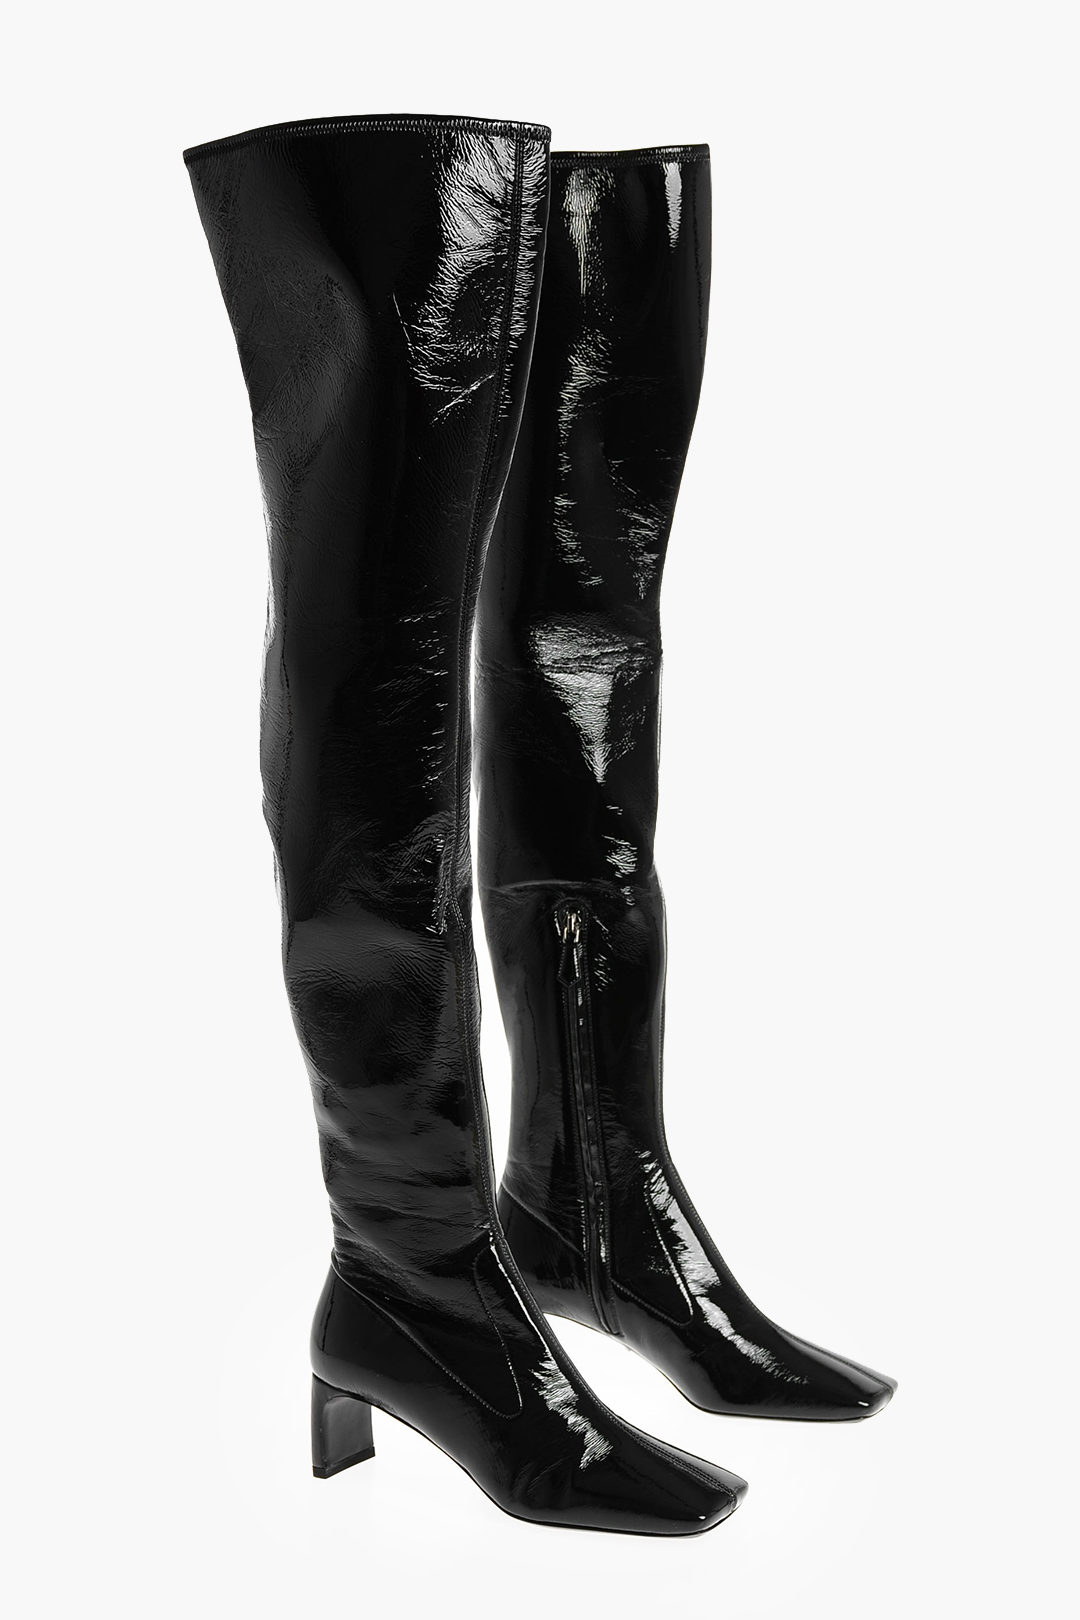 Prada Over the Knee Tech Patent Leather Boots women - Glamood Outlet